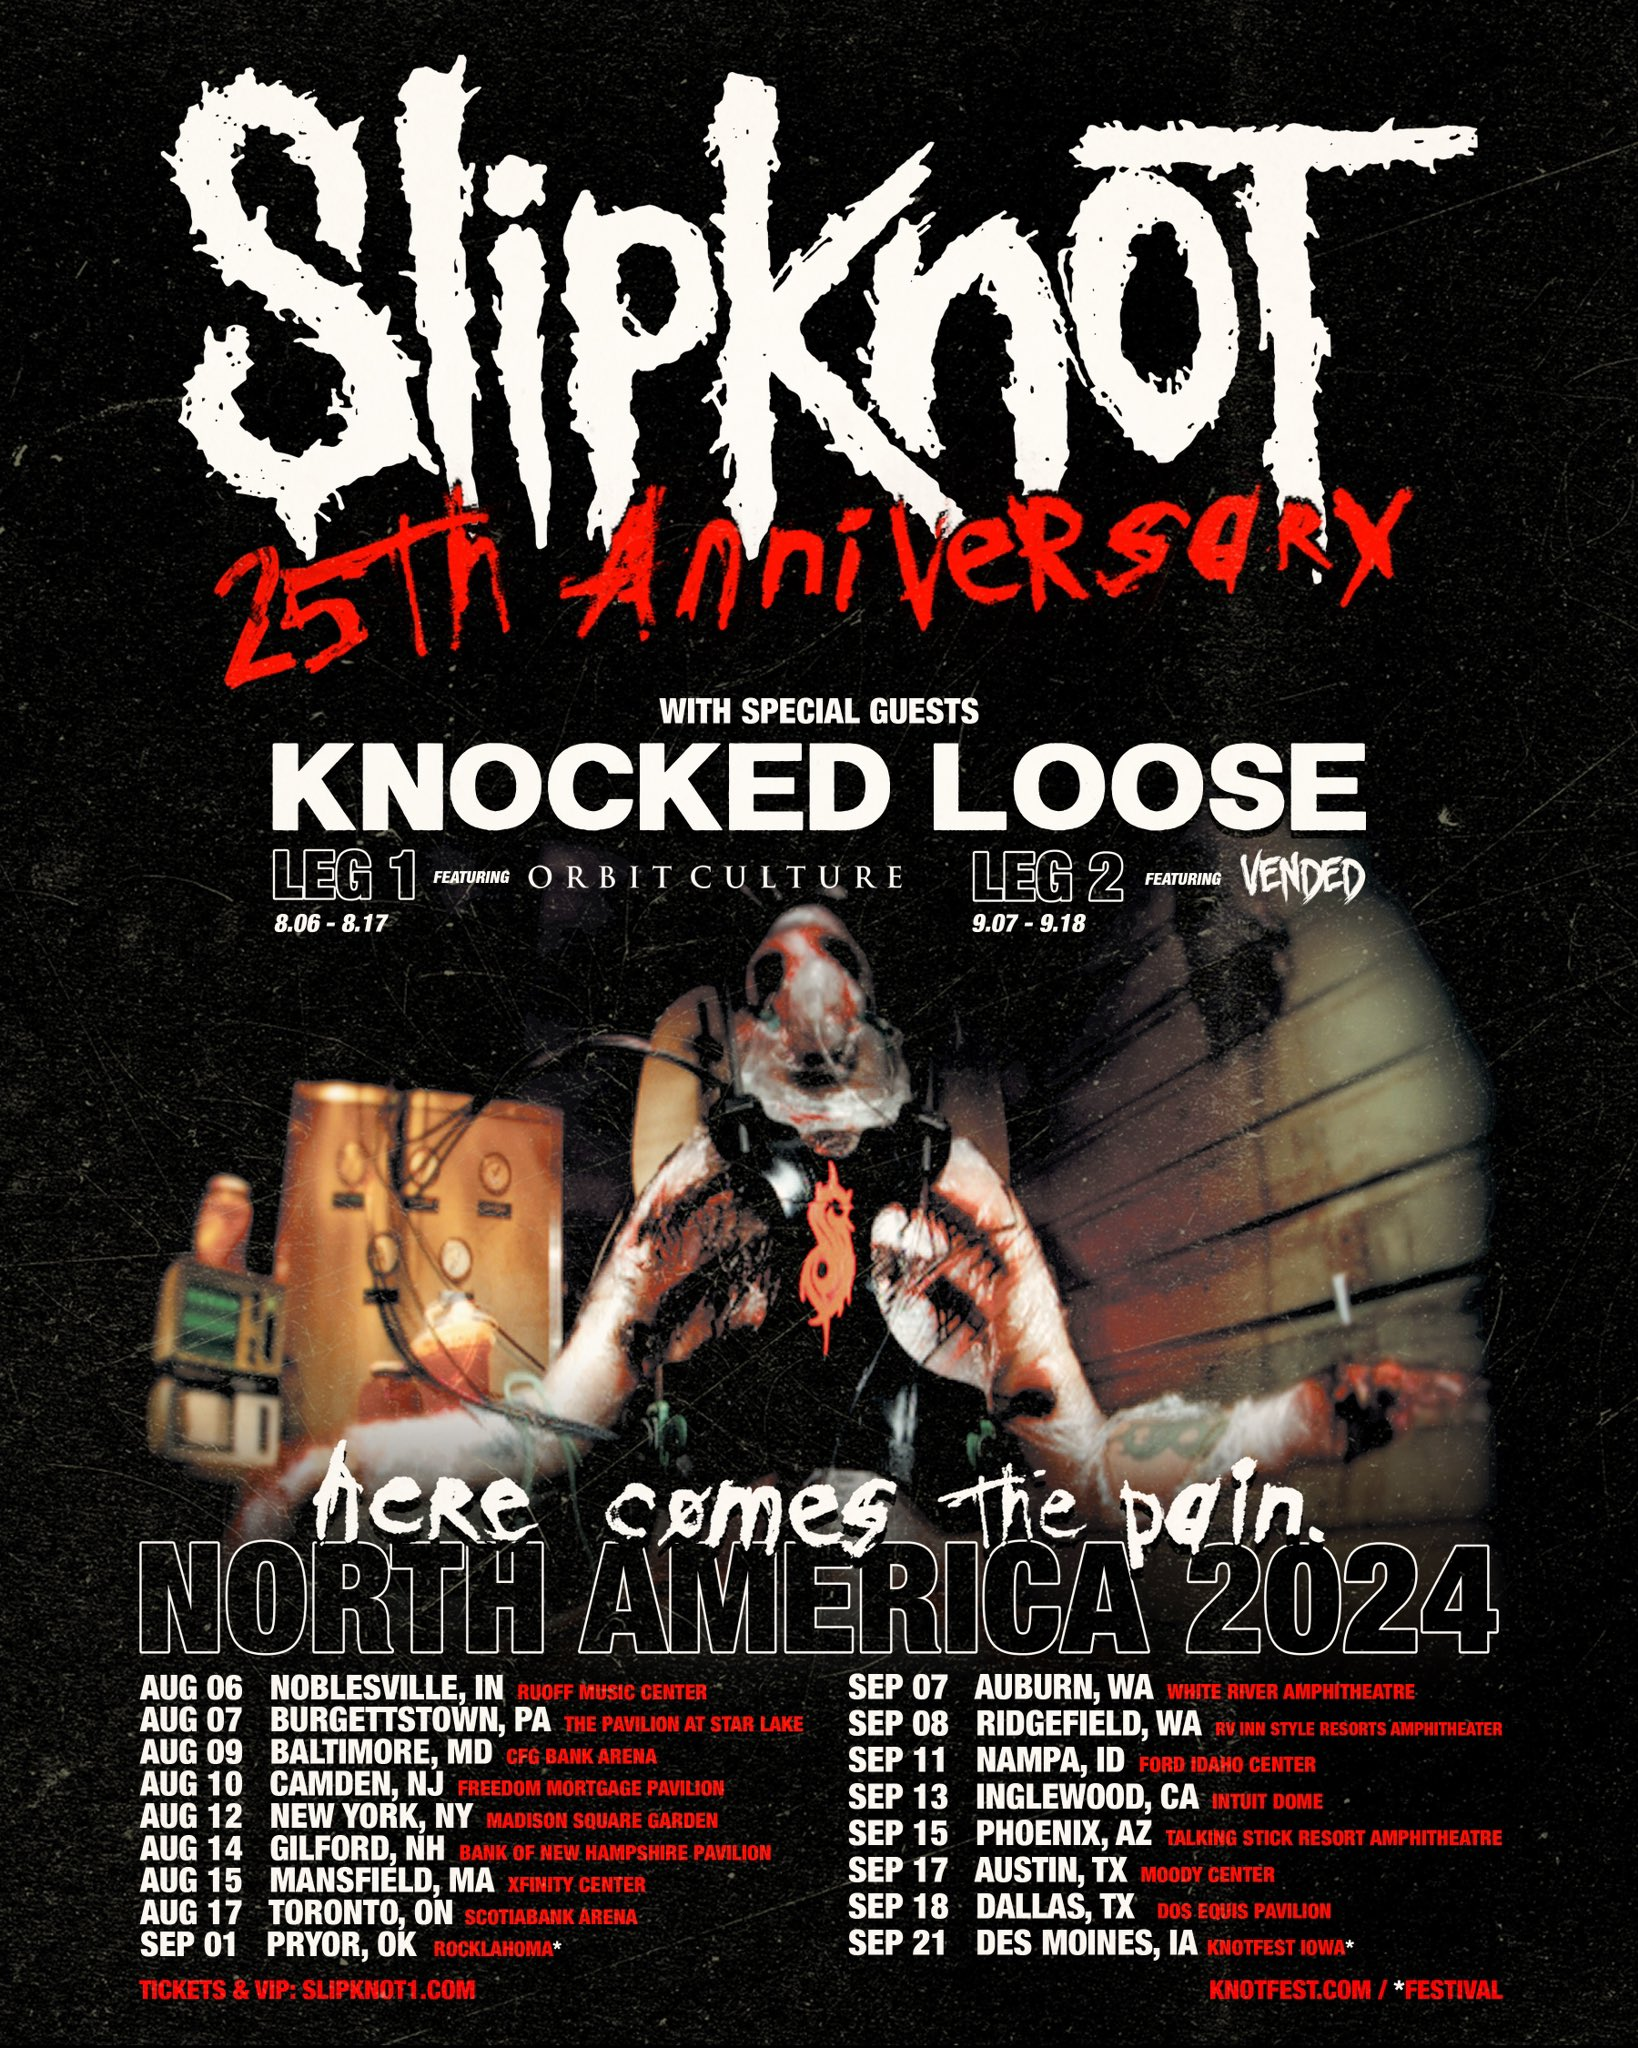 Slipknot Announce 25th Anniverary "Here Comes The Pain" North American Tour Featuring Knocked Loose, Orbit Culture and Vended